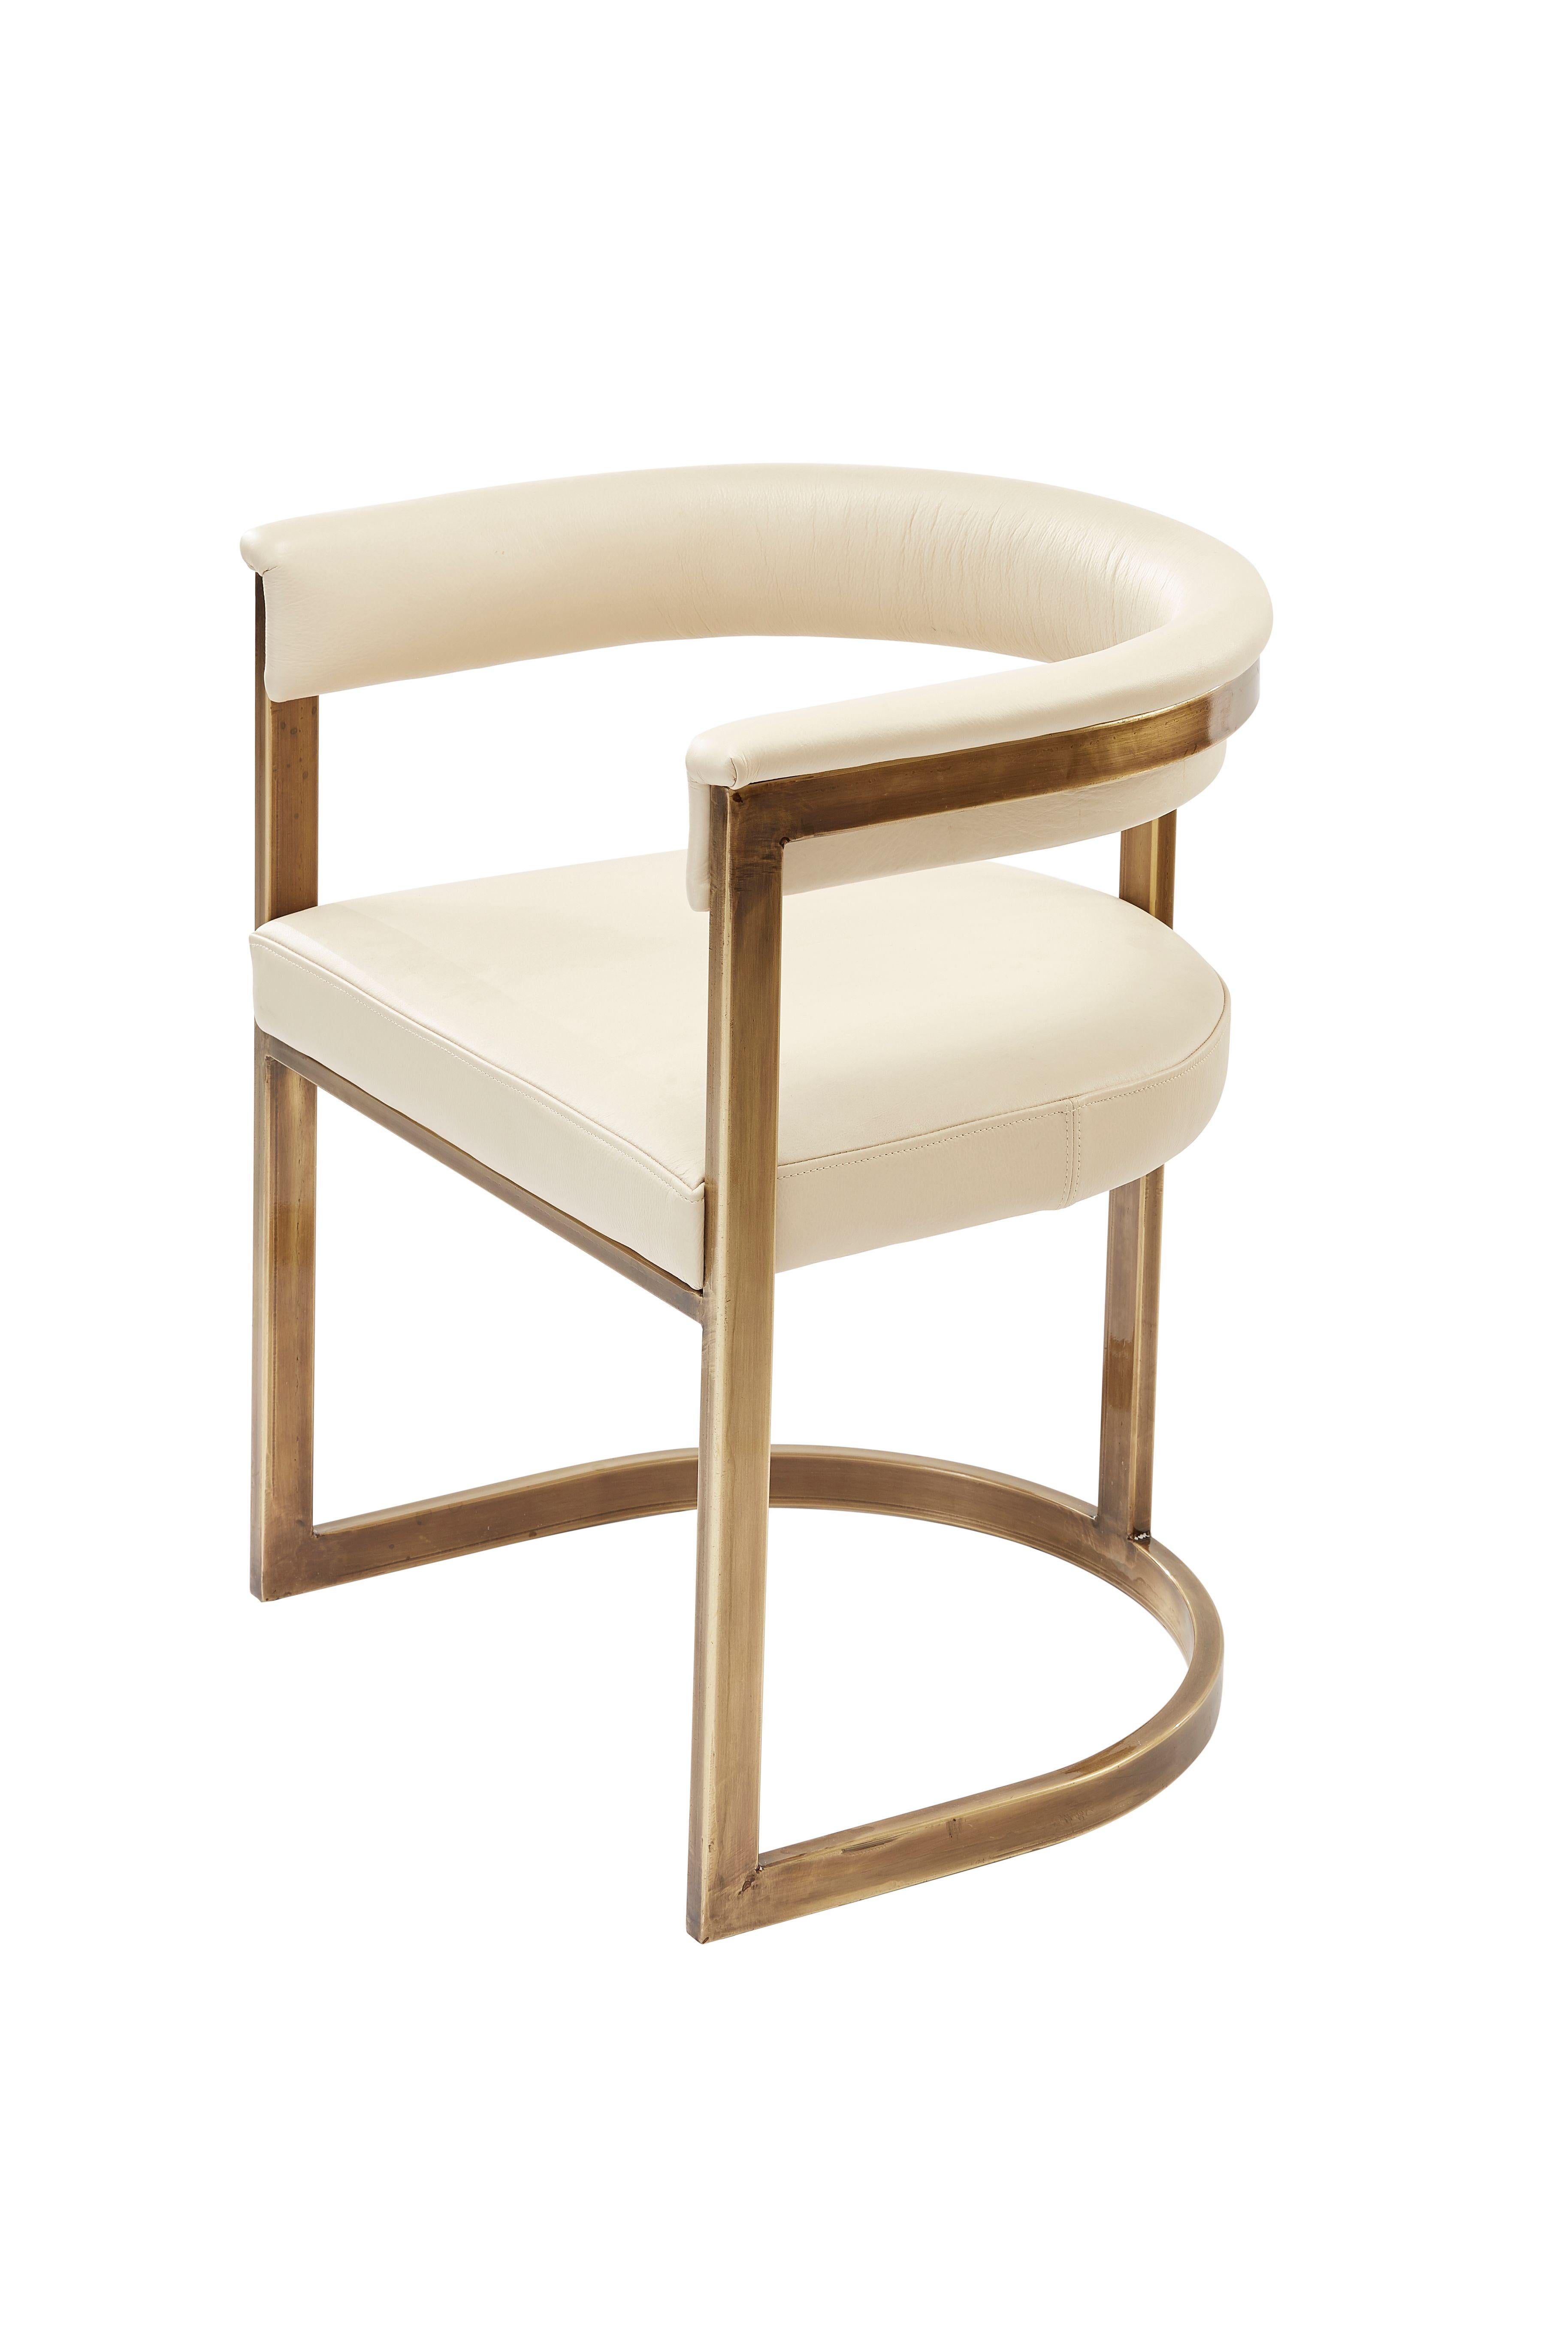 Post-Modern Agate Dining Chair by Egg Designs For Sale